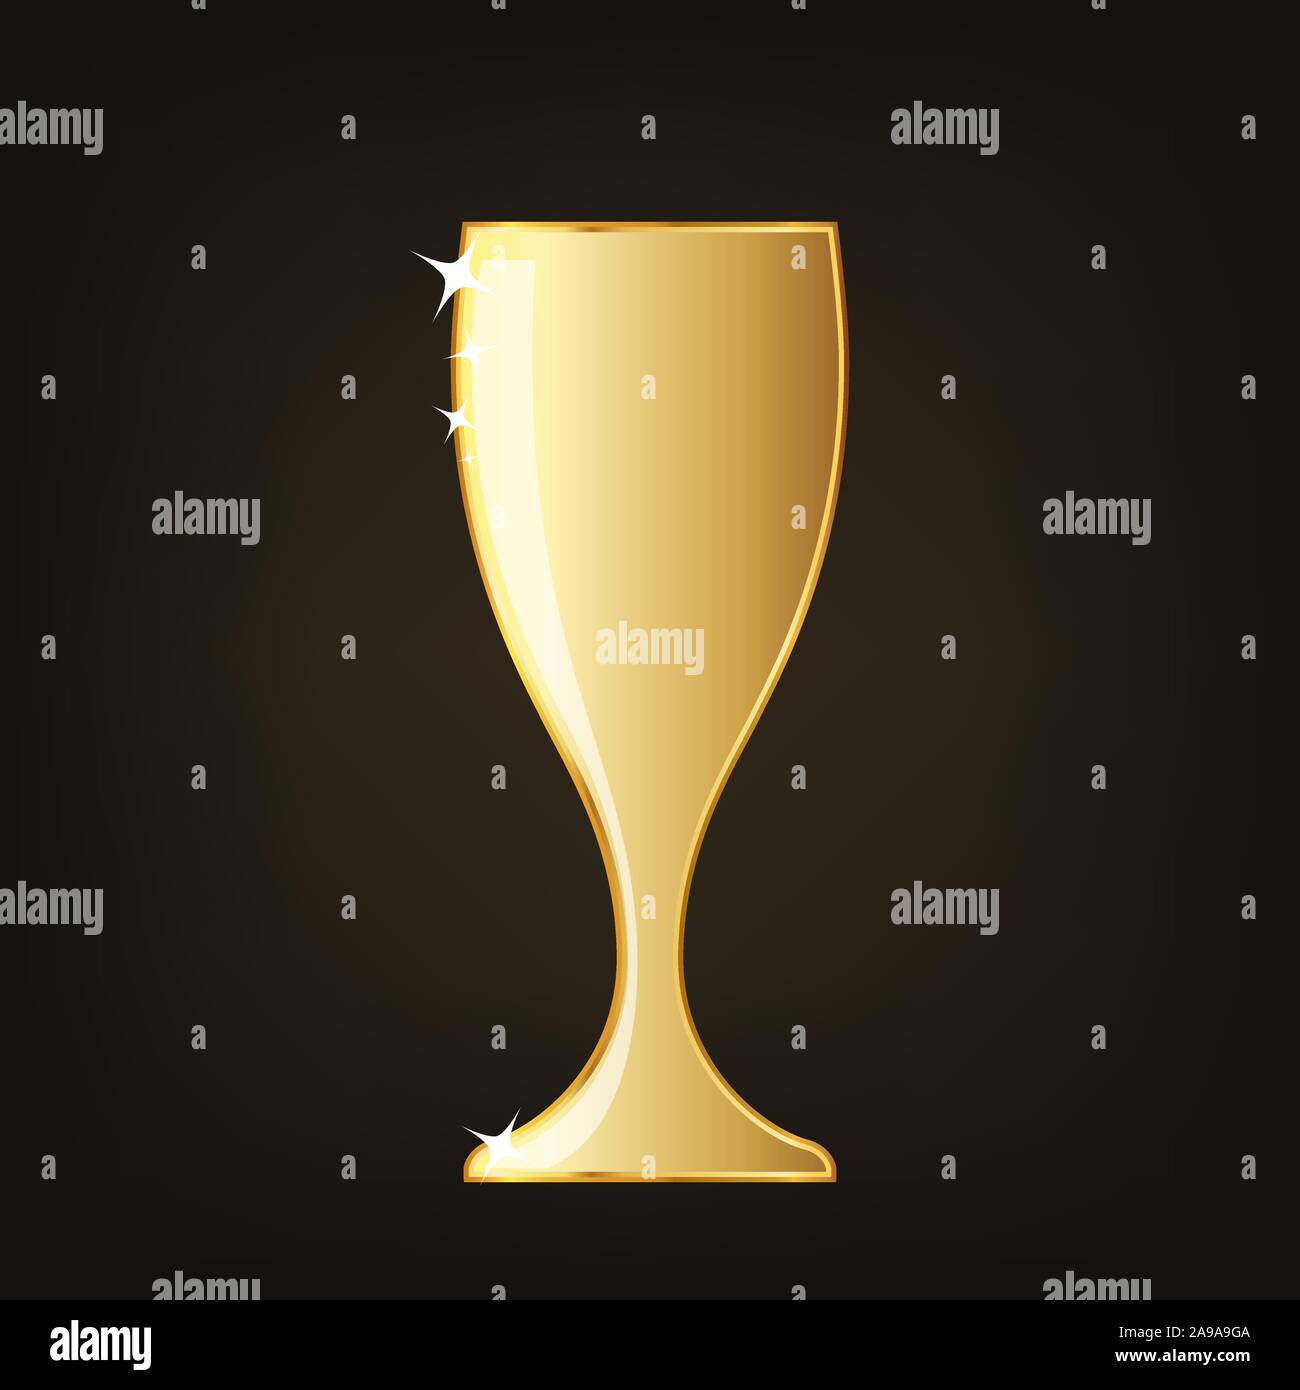 Golden wine glass icon. Vector illustration. Golden wine glass cup icon on dark background. Stock Vector